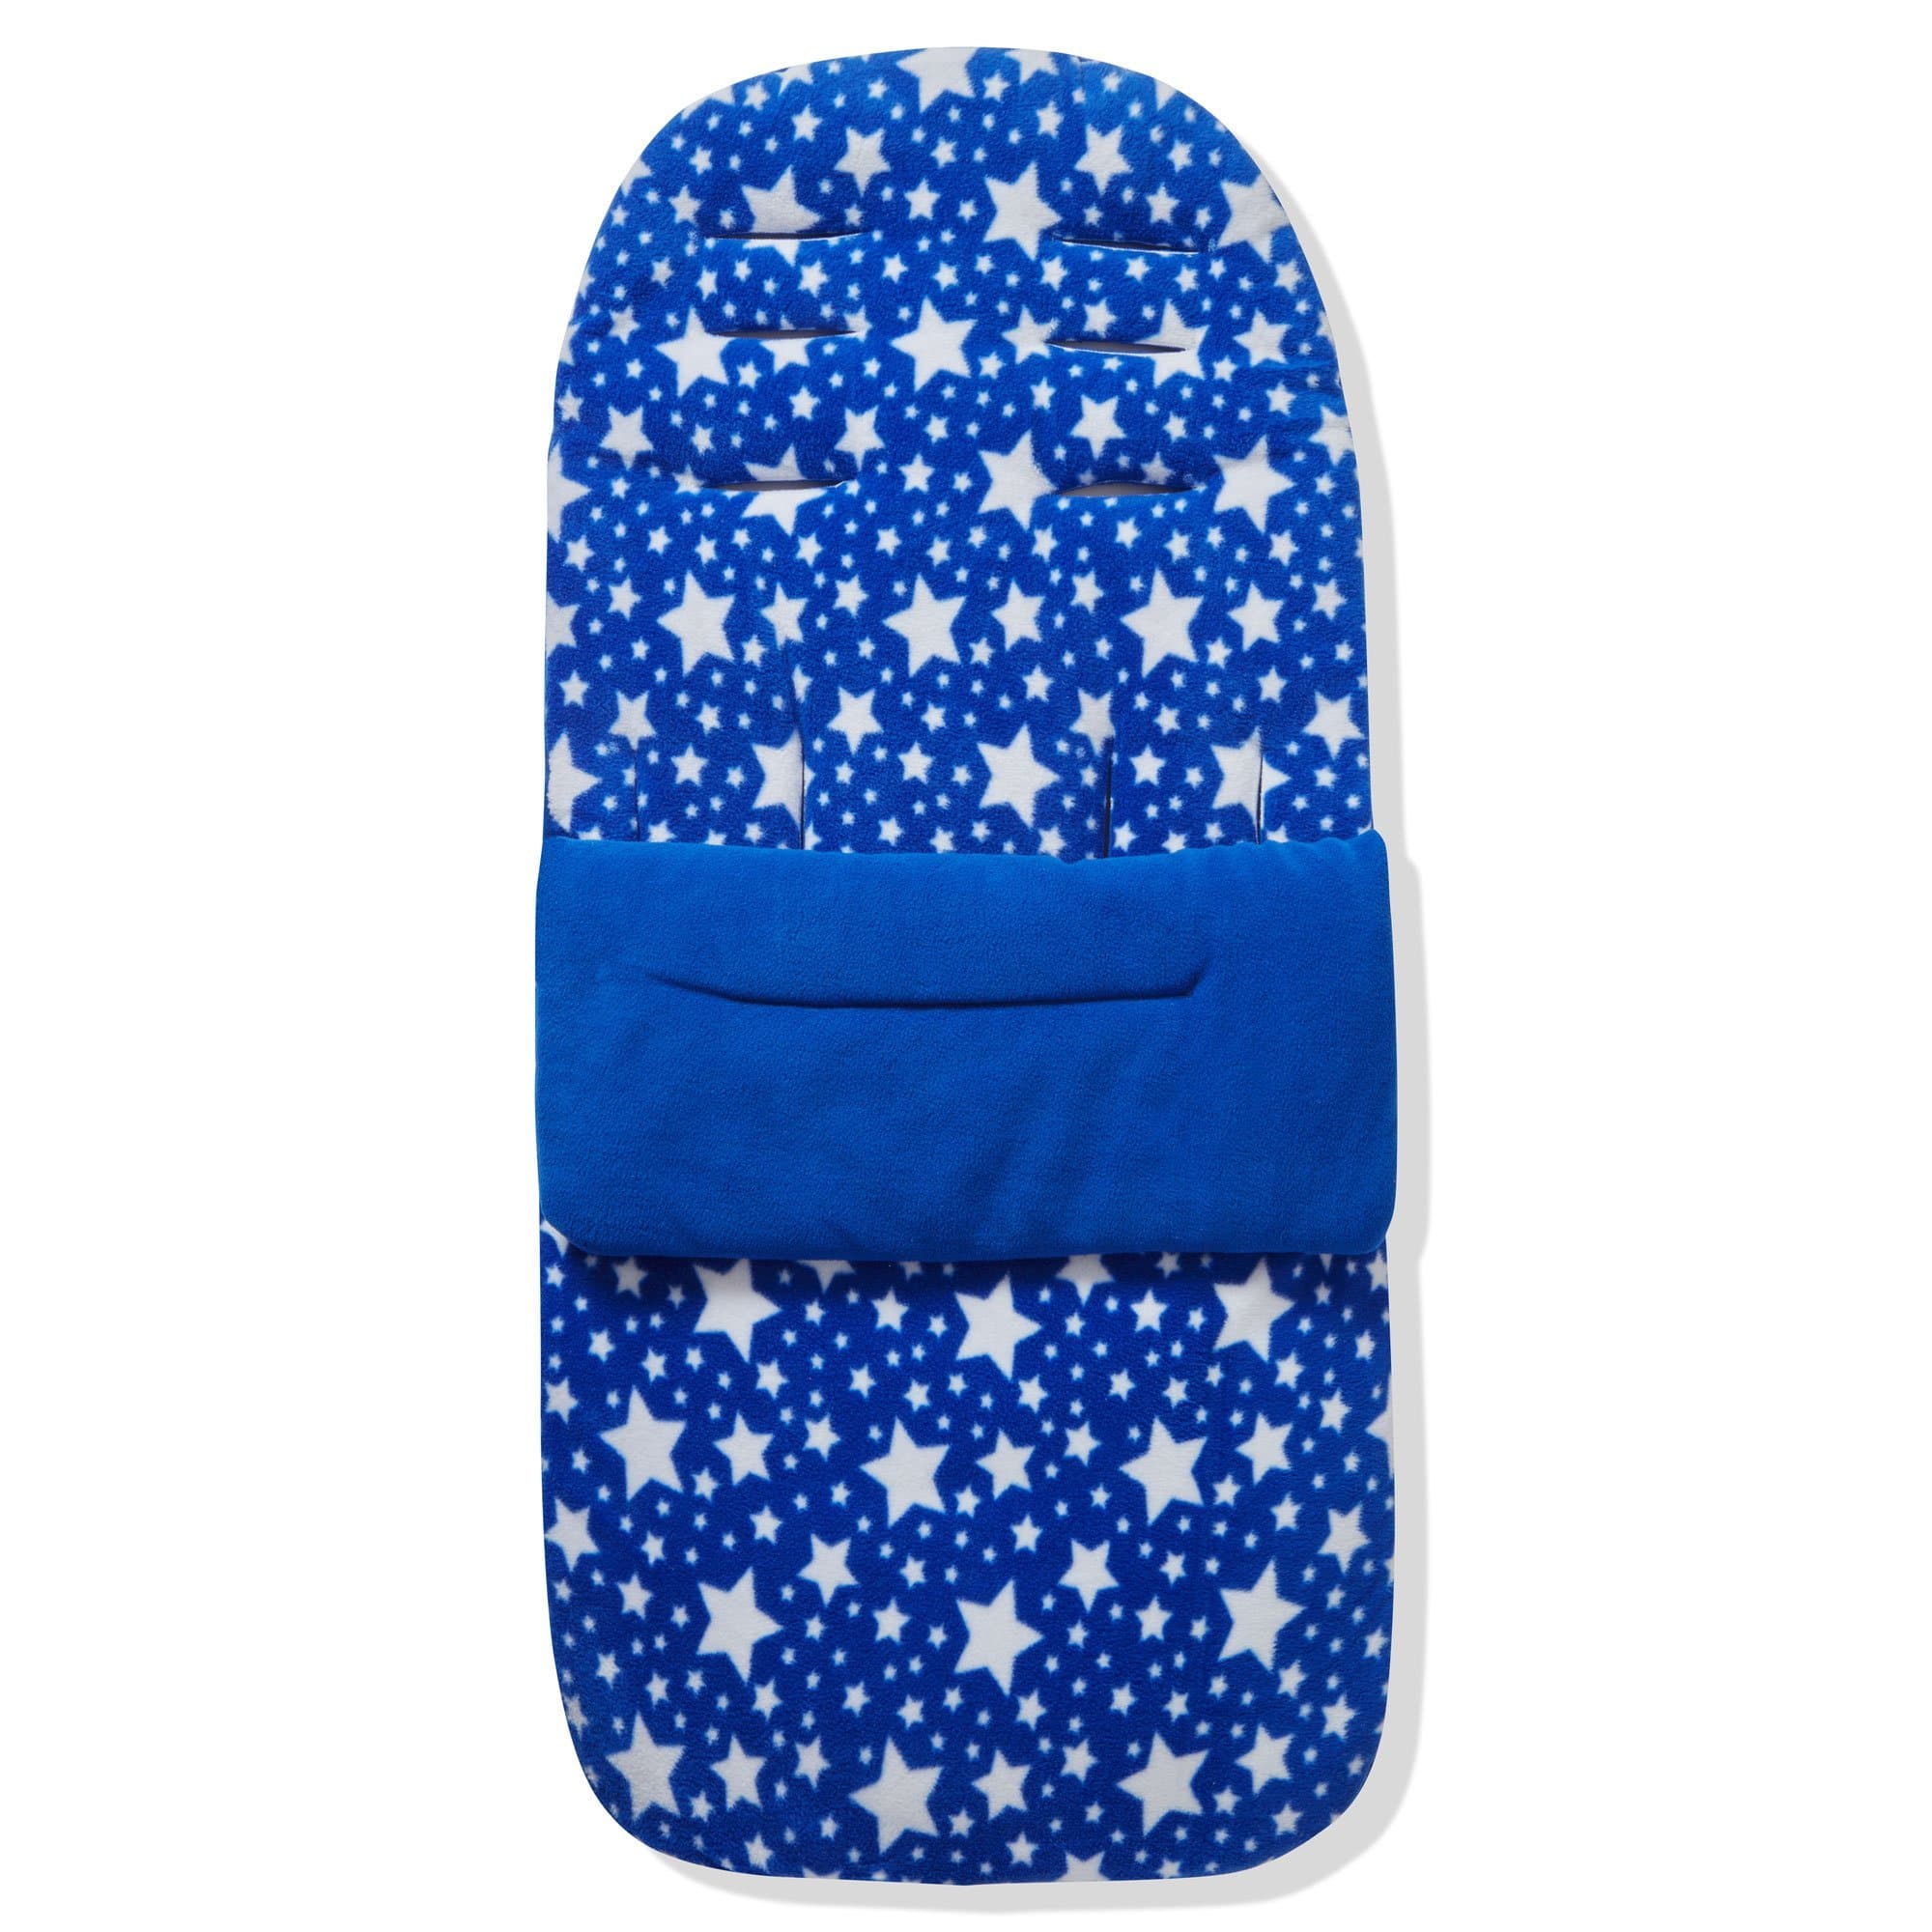 Fleece Footmuff / Cosy Toes Compatible with Ickle Bubba - Blue Star / Fits All Models | For Your Little One